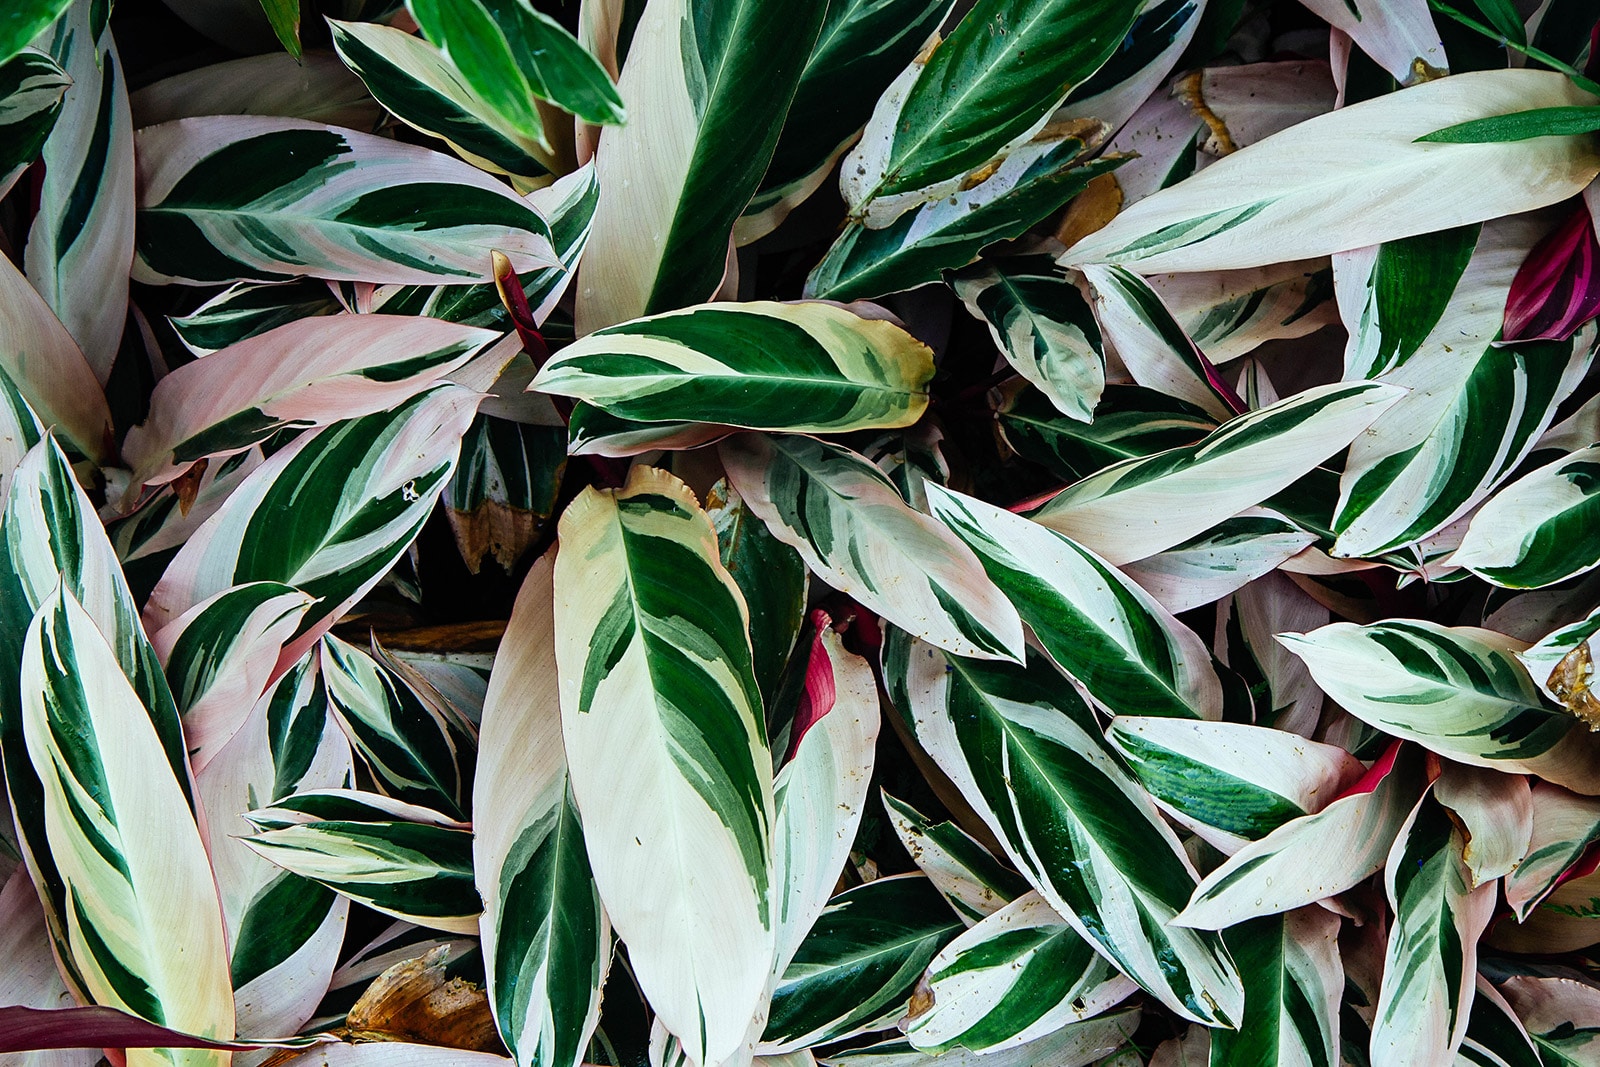 Ctenanthe oppenheimiana 'Tricolor' foliage showing dramatic splashes of green and pink against white leaves